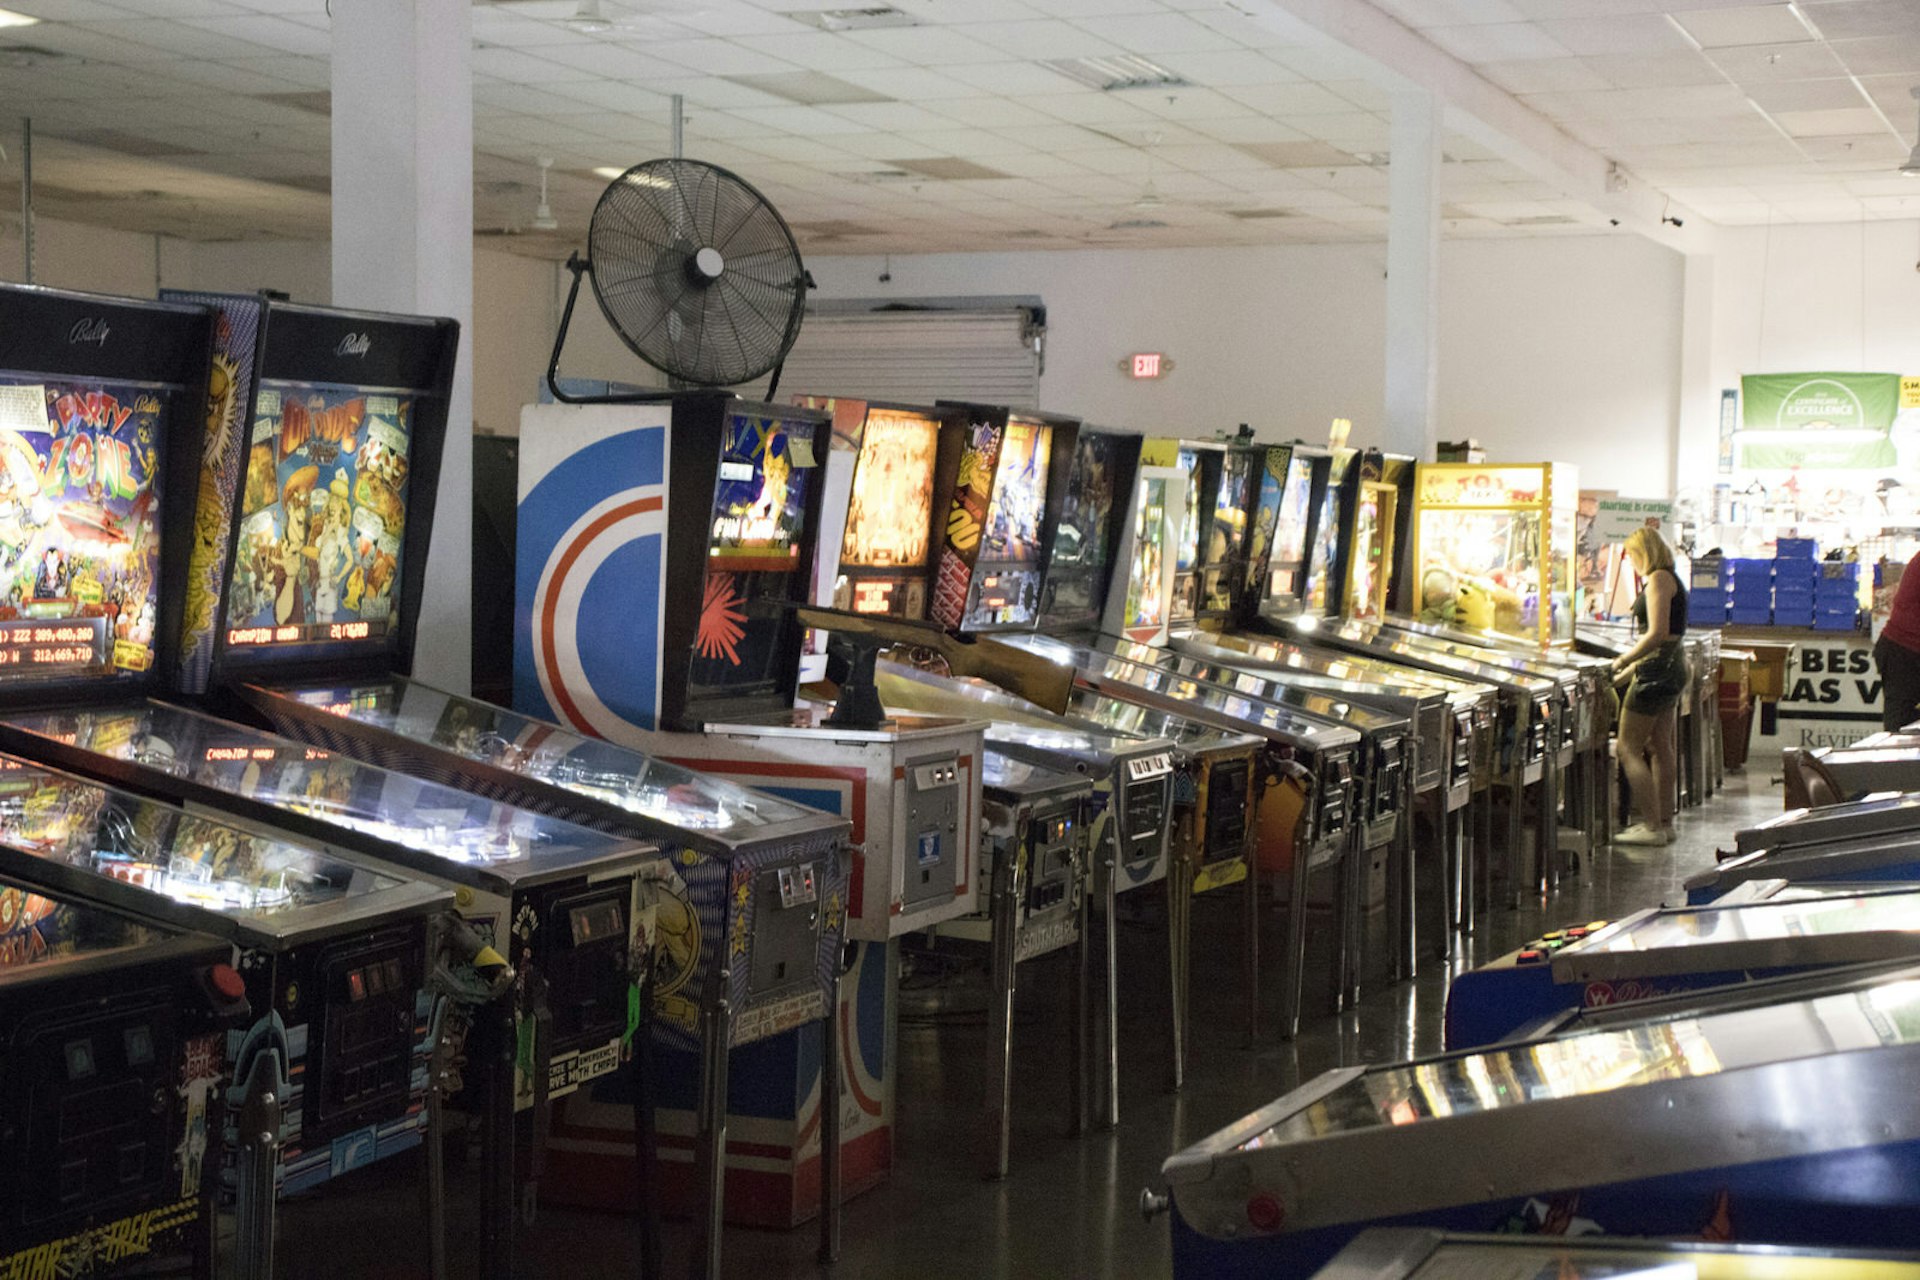 A row of arcade games in the Pinball Hall of Fame © Greg Thilmont / Lonely Planet